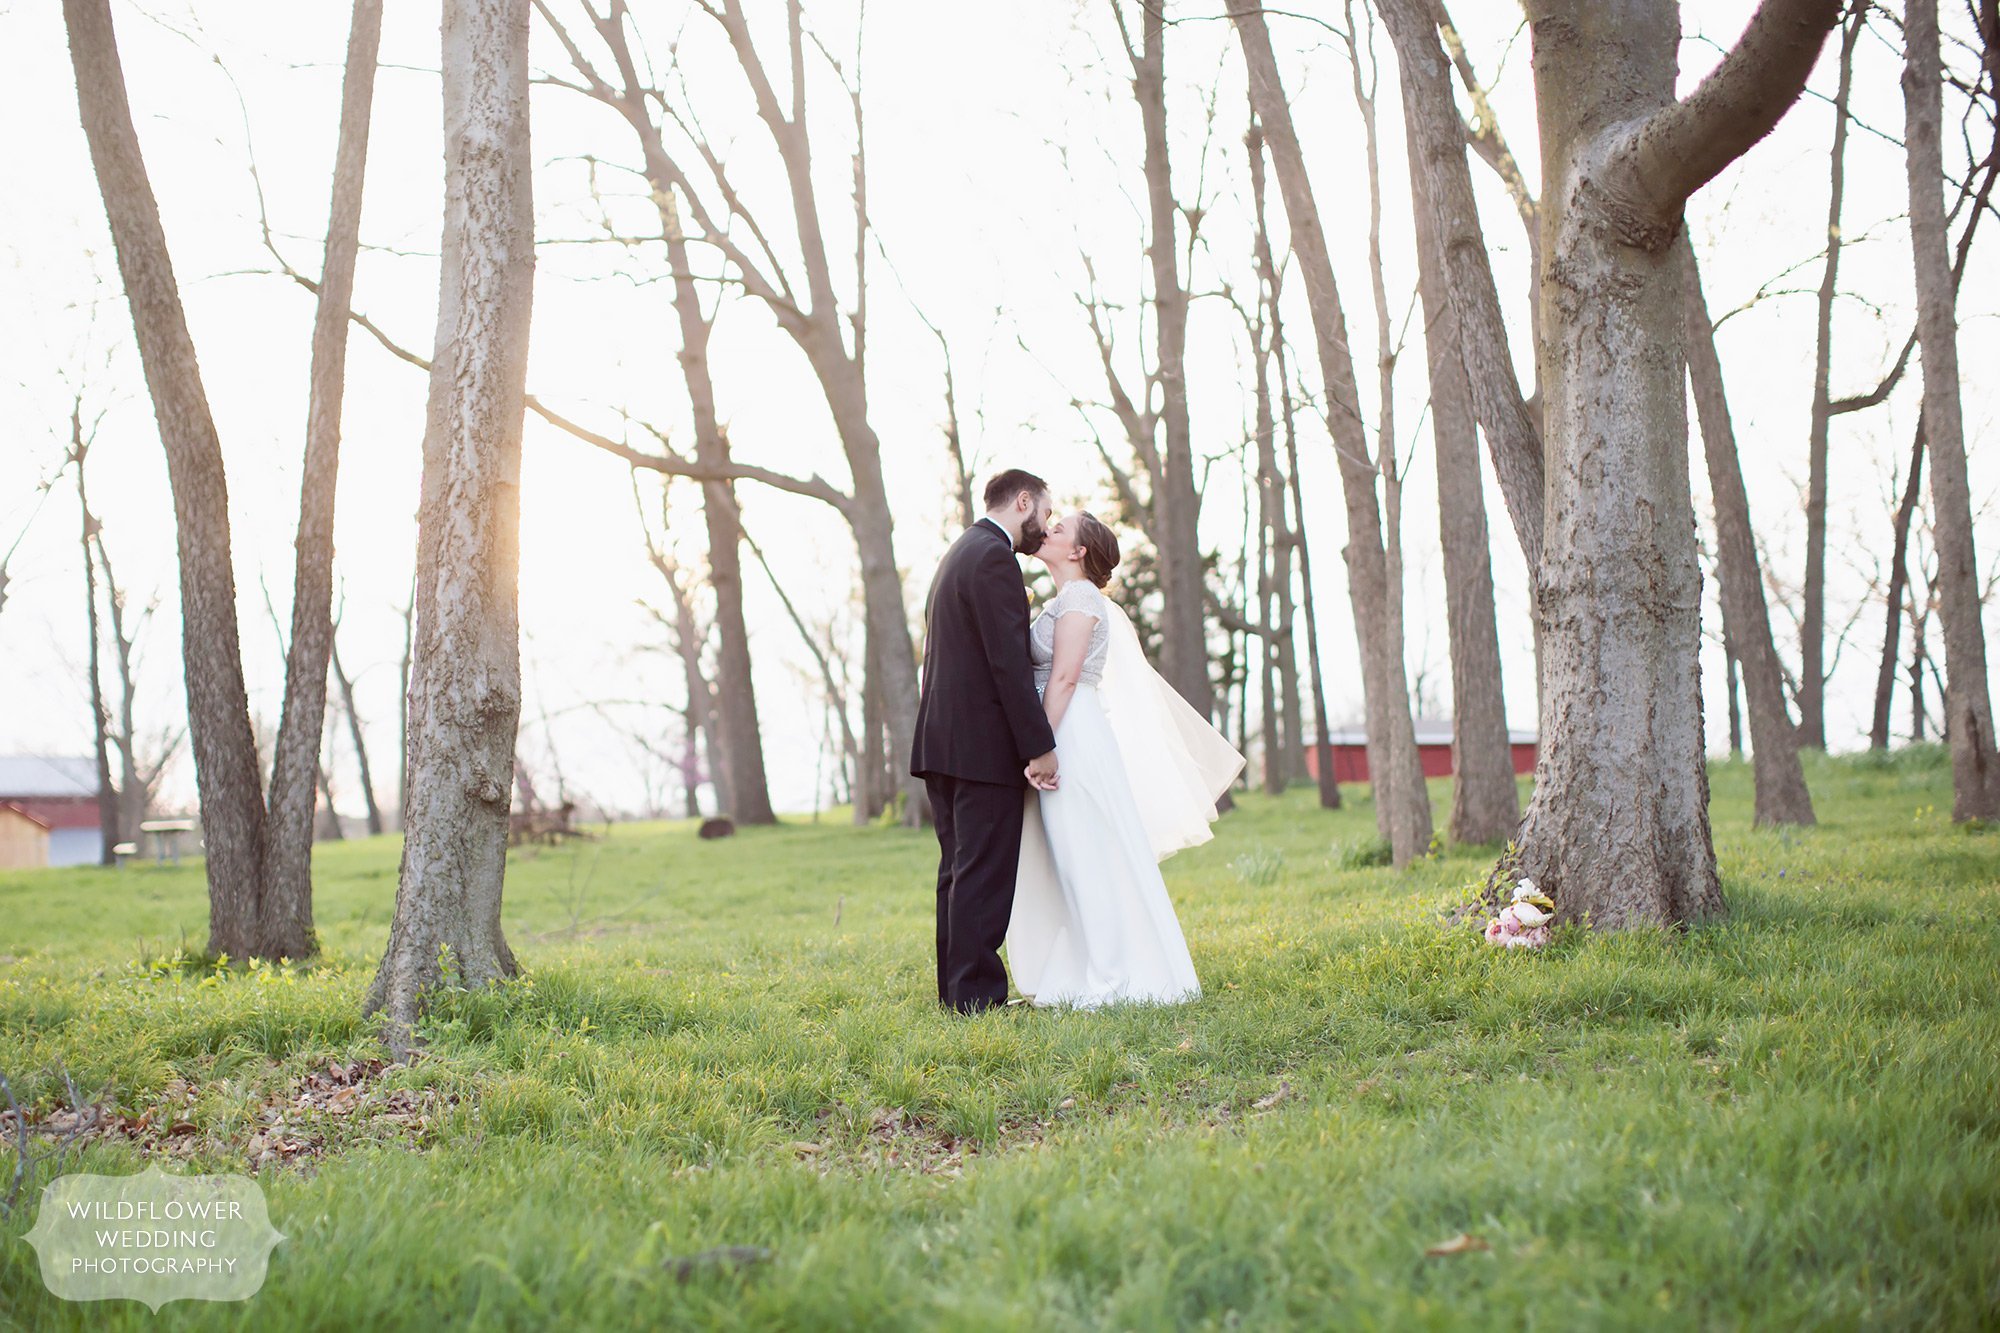 Elopement wedding photography of the bride and groom at Nifong Park in MO.